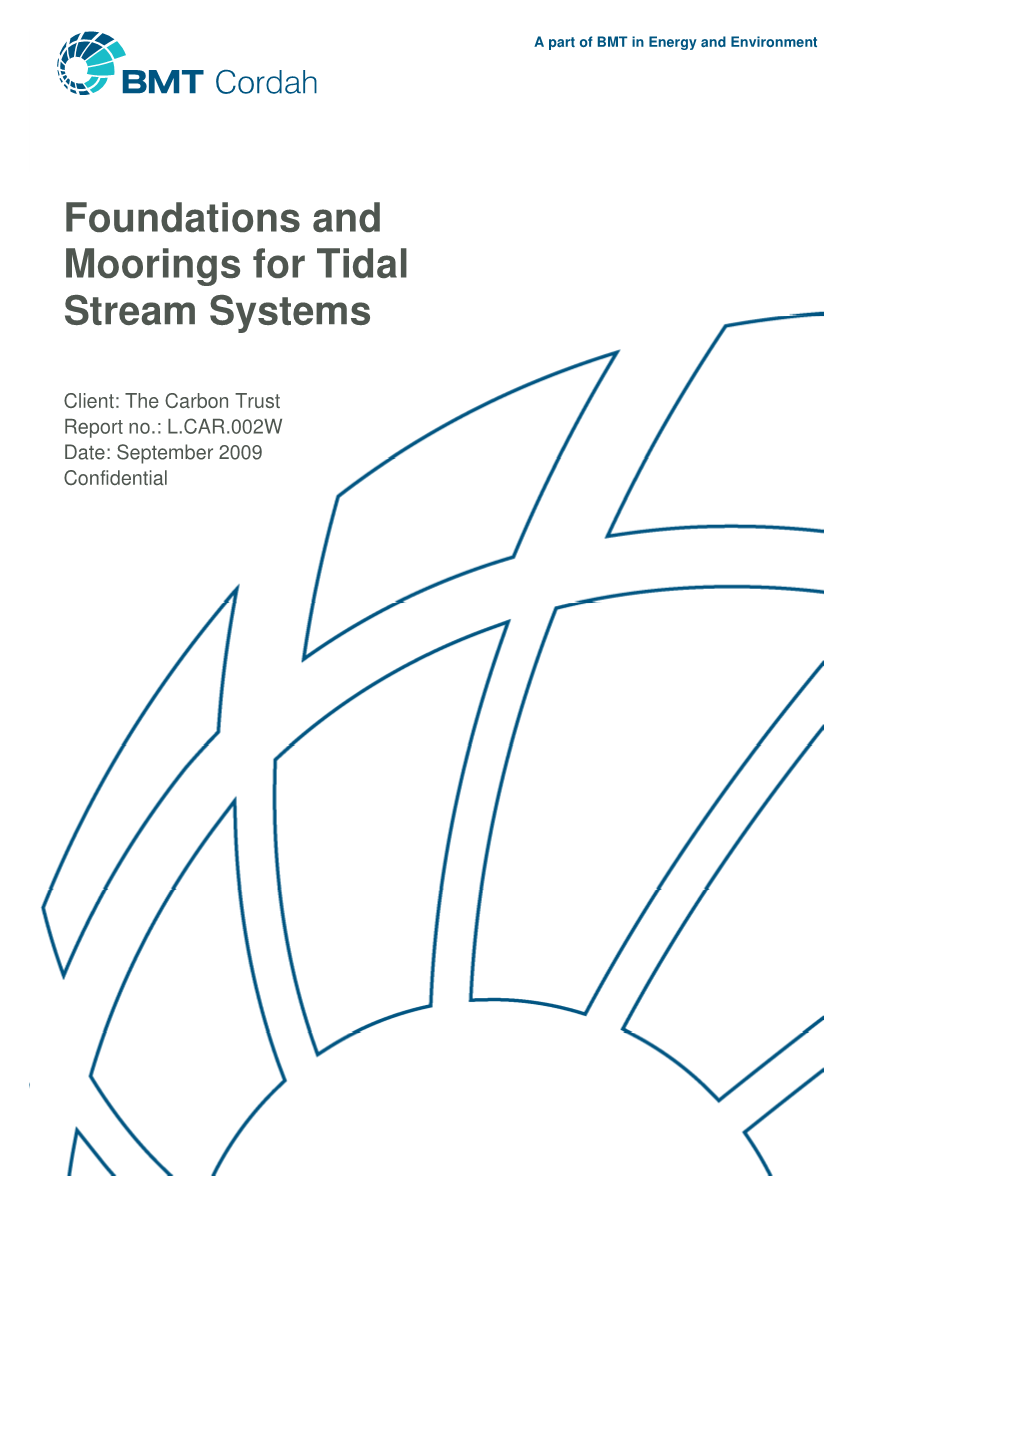 Foundations and Moorings for Tidal Stream Systems